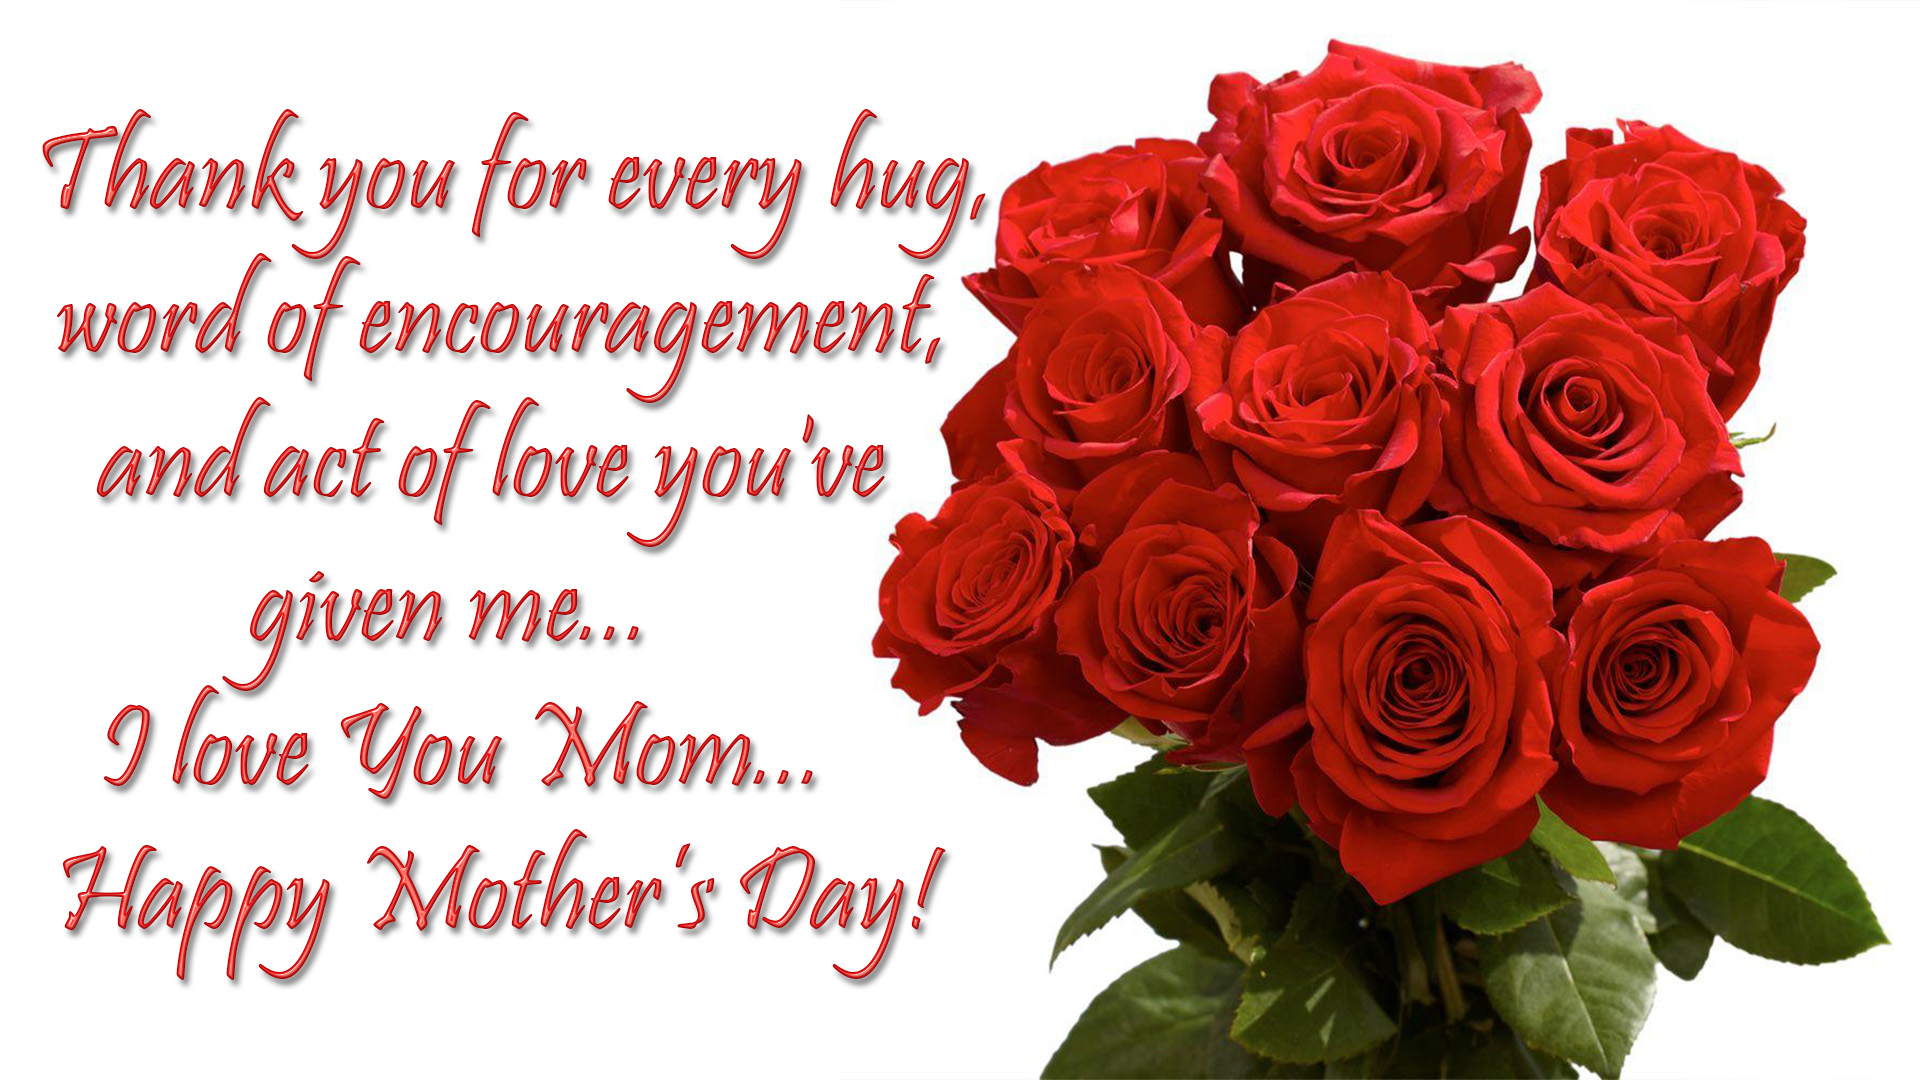 mothers day message image